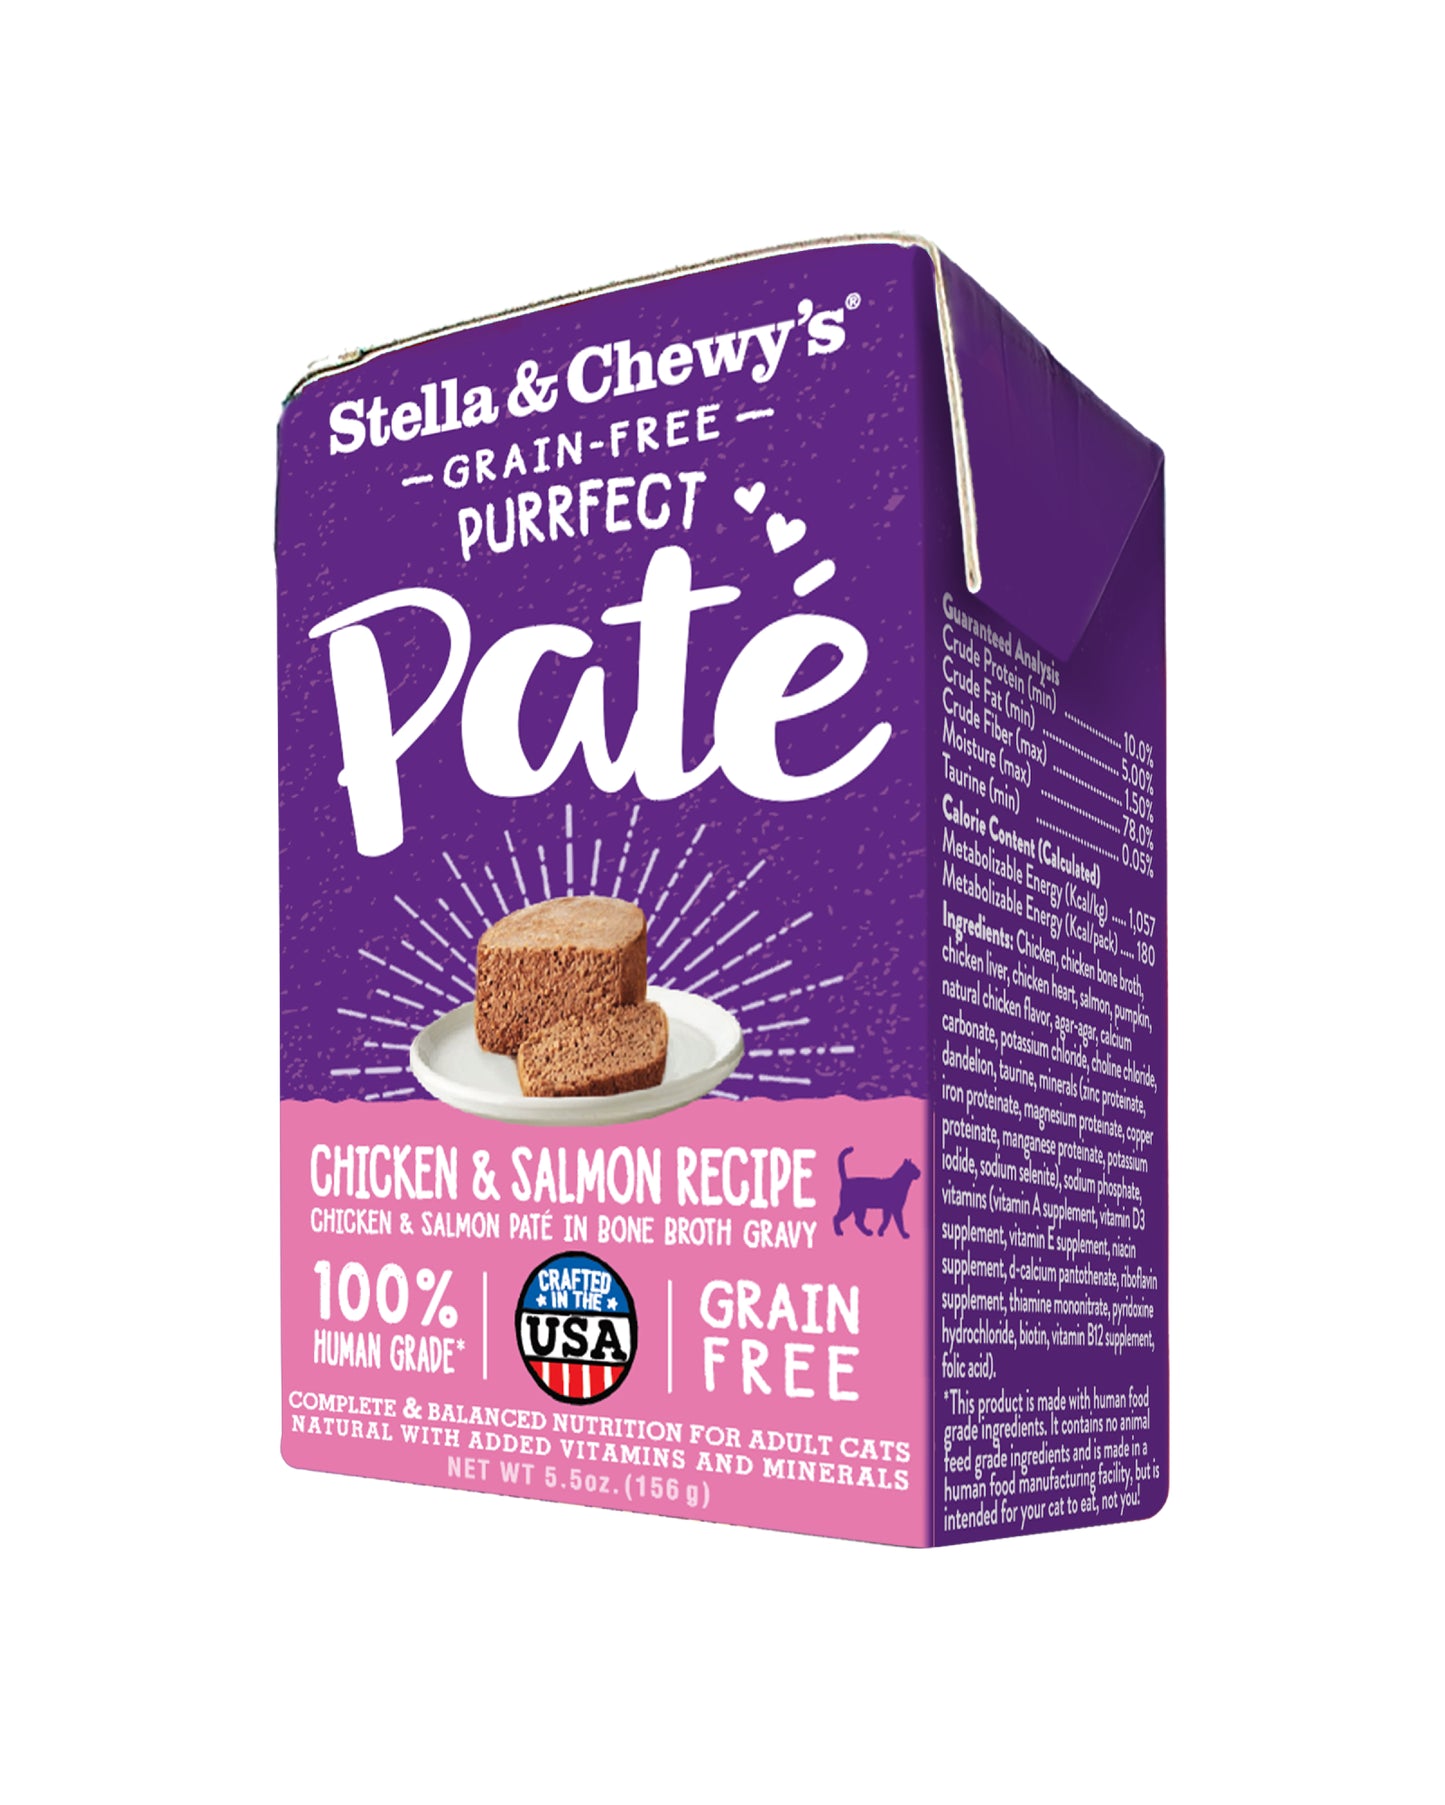 Purrfect Grain Free Pate for Cats - Chicken & Salmon Recipe - Pack of 12